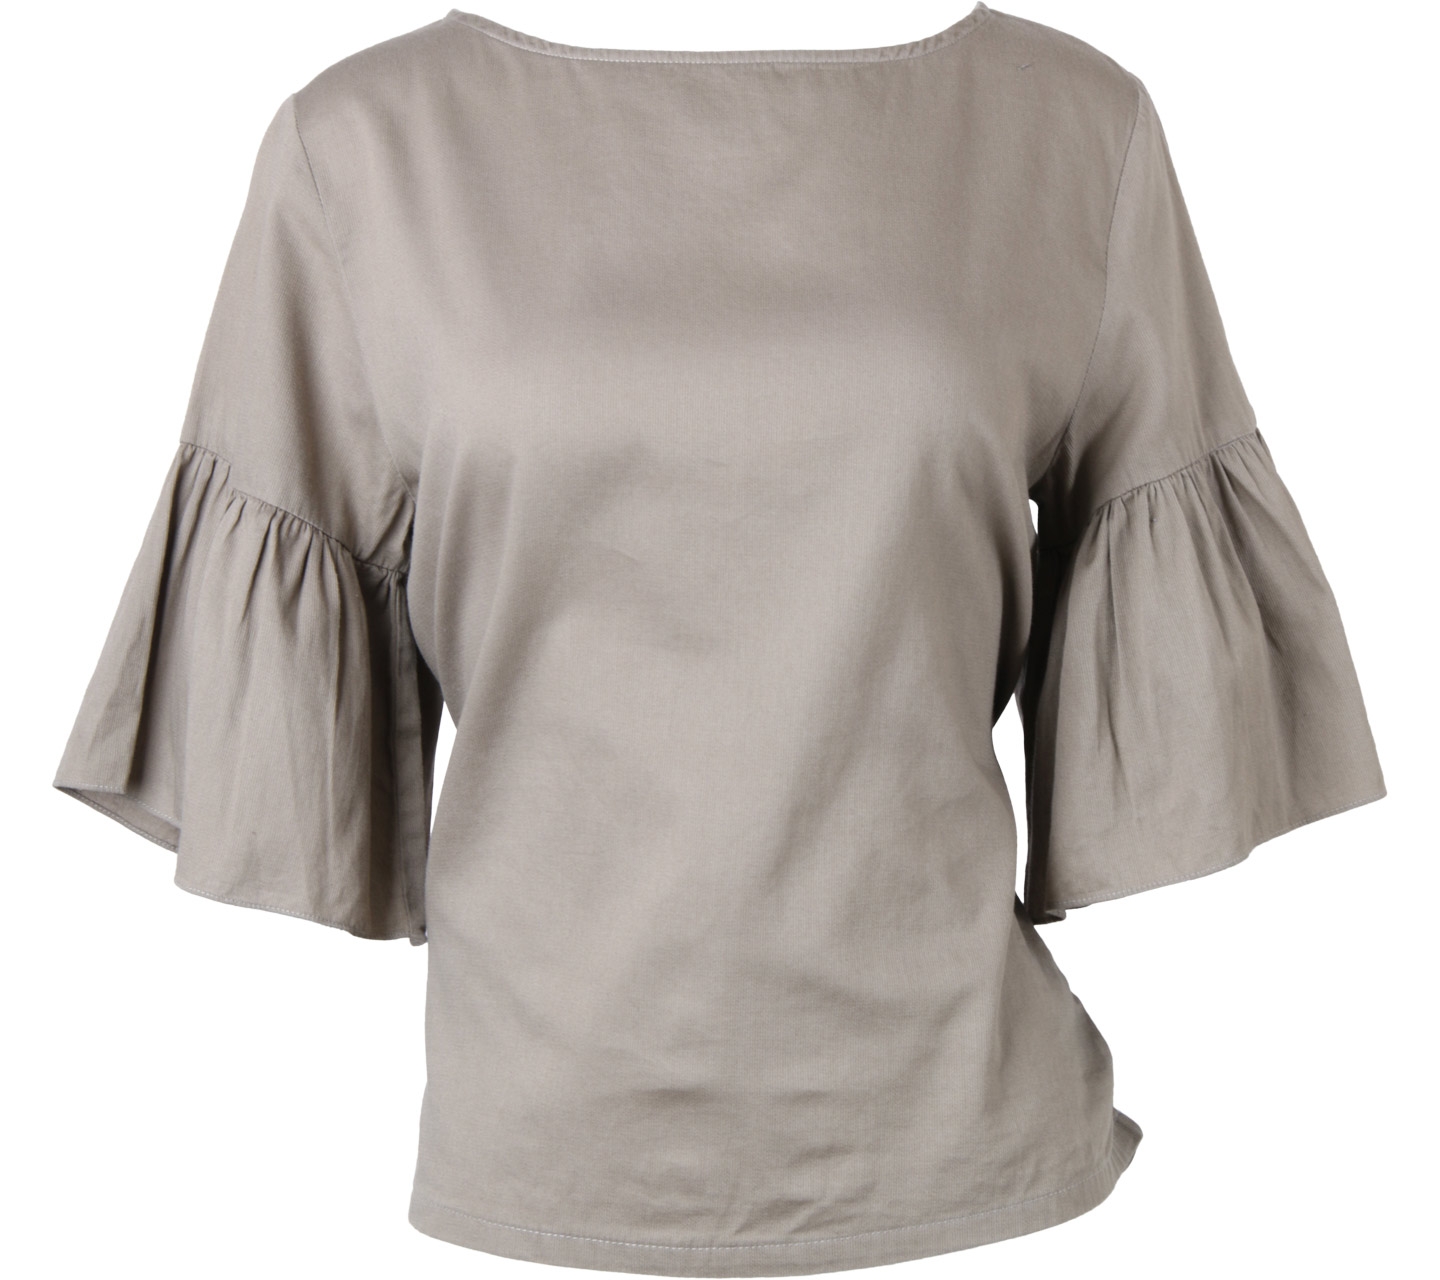 ATS The Label Grey Tied Blouse